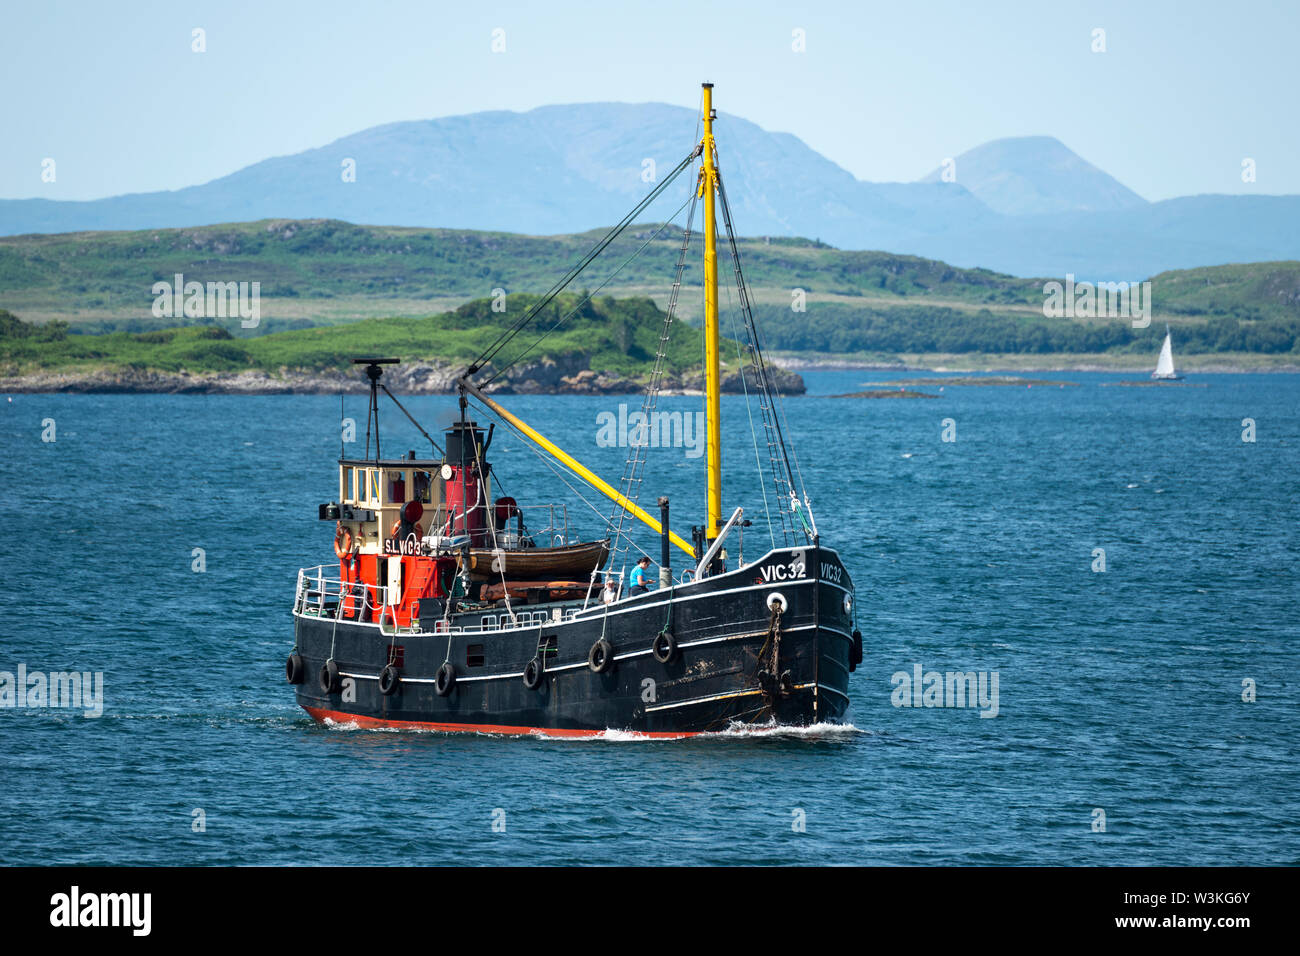 Clyde puffer VIC32, one of the last seagoing coal-fired steam lighters,  approaching Crinan Village in Argyll and Bute, Scotland, UK Stock Photo -  Alamy